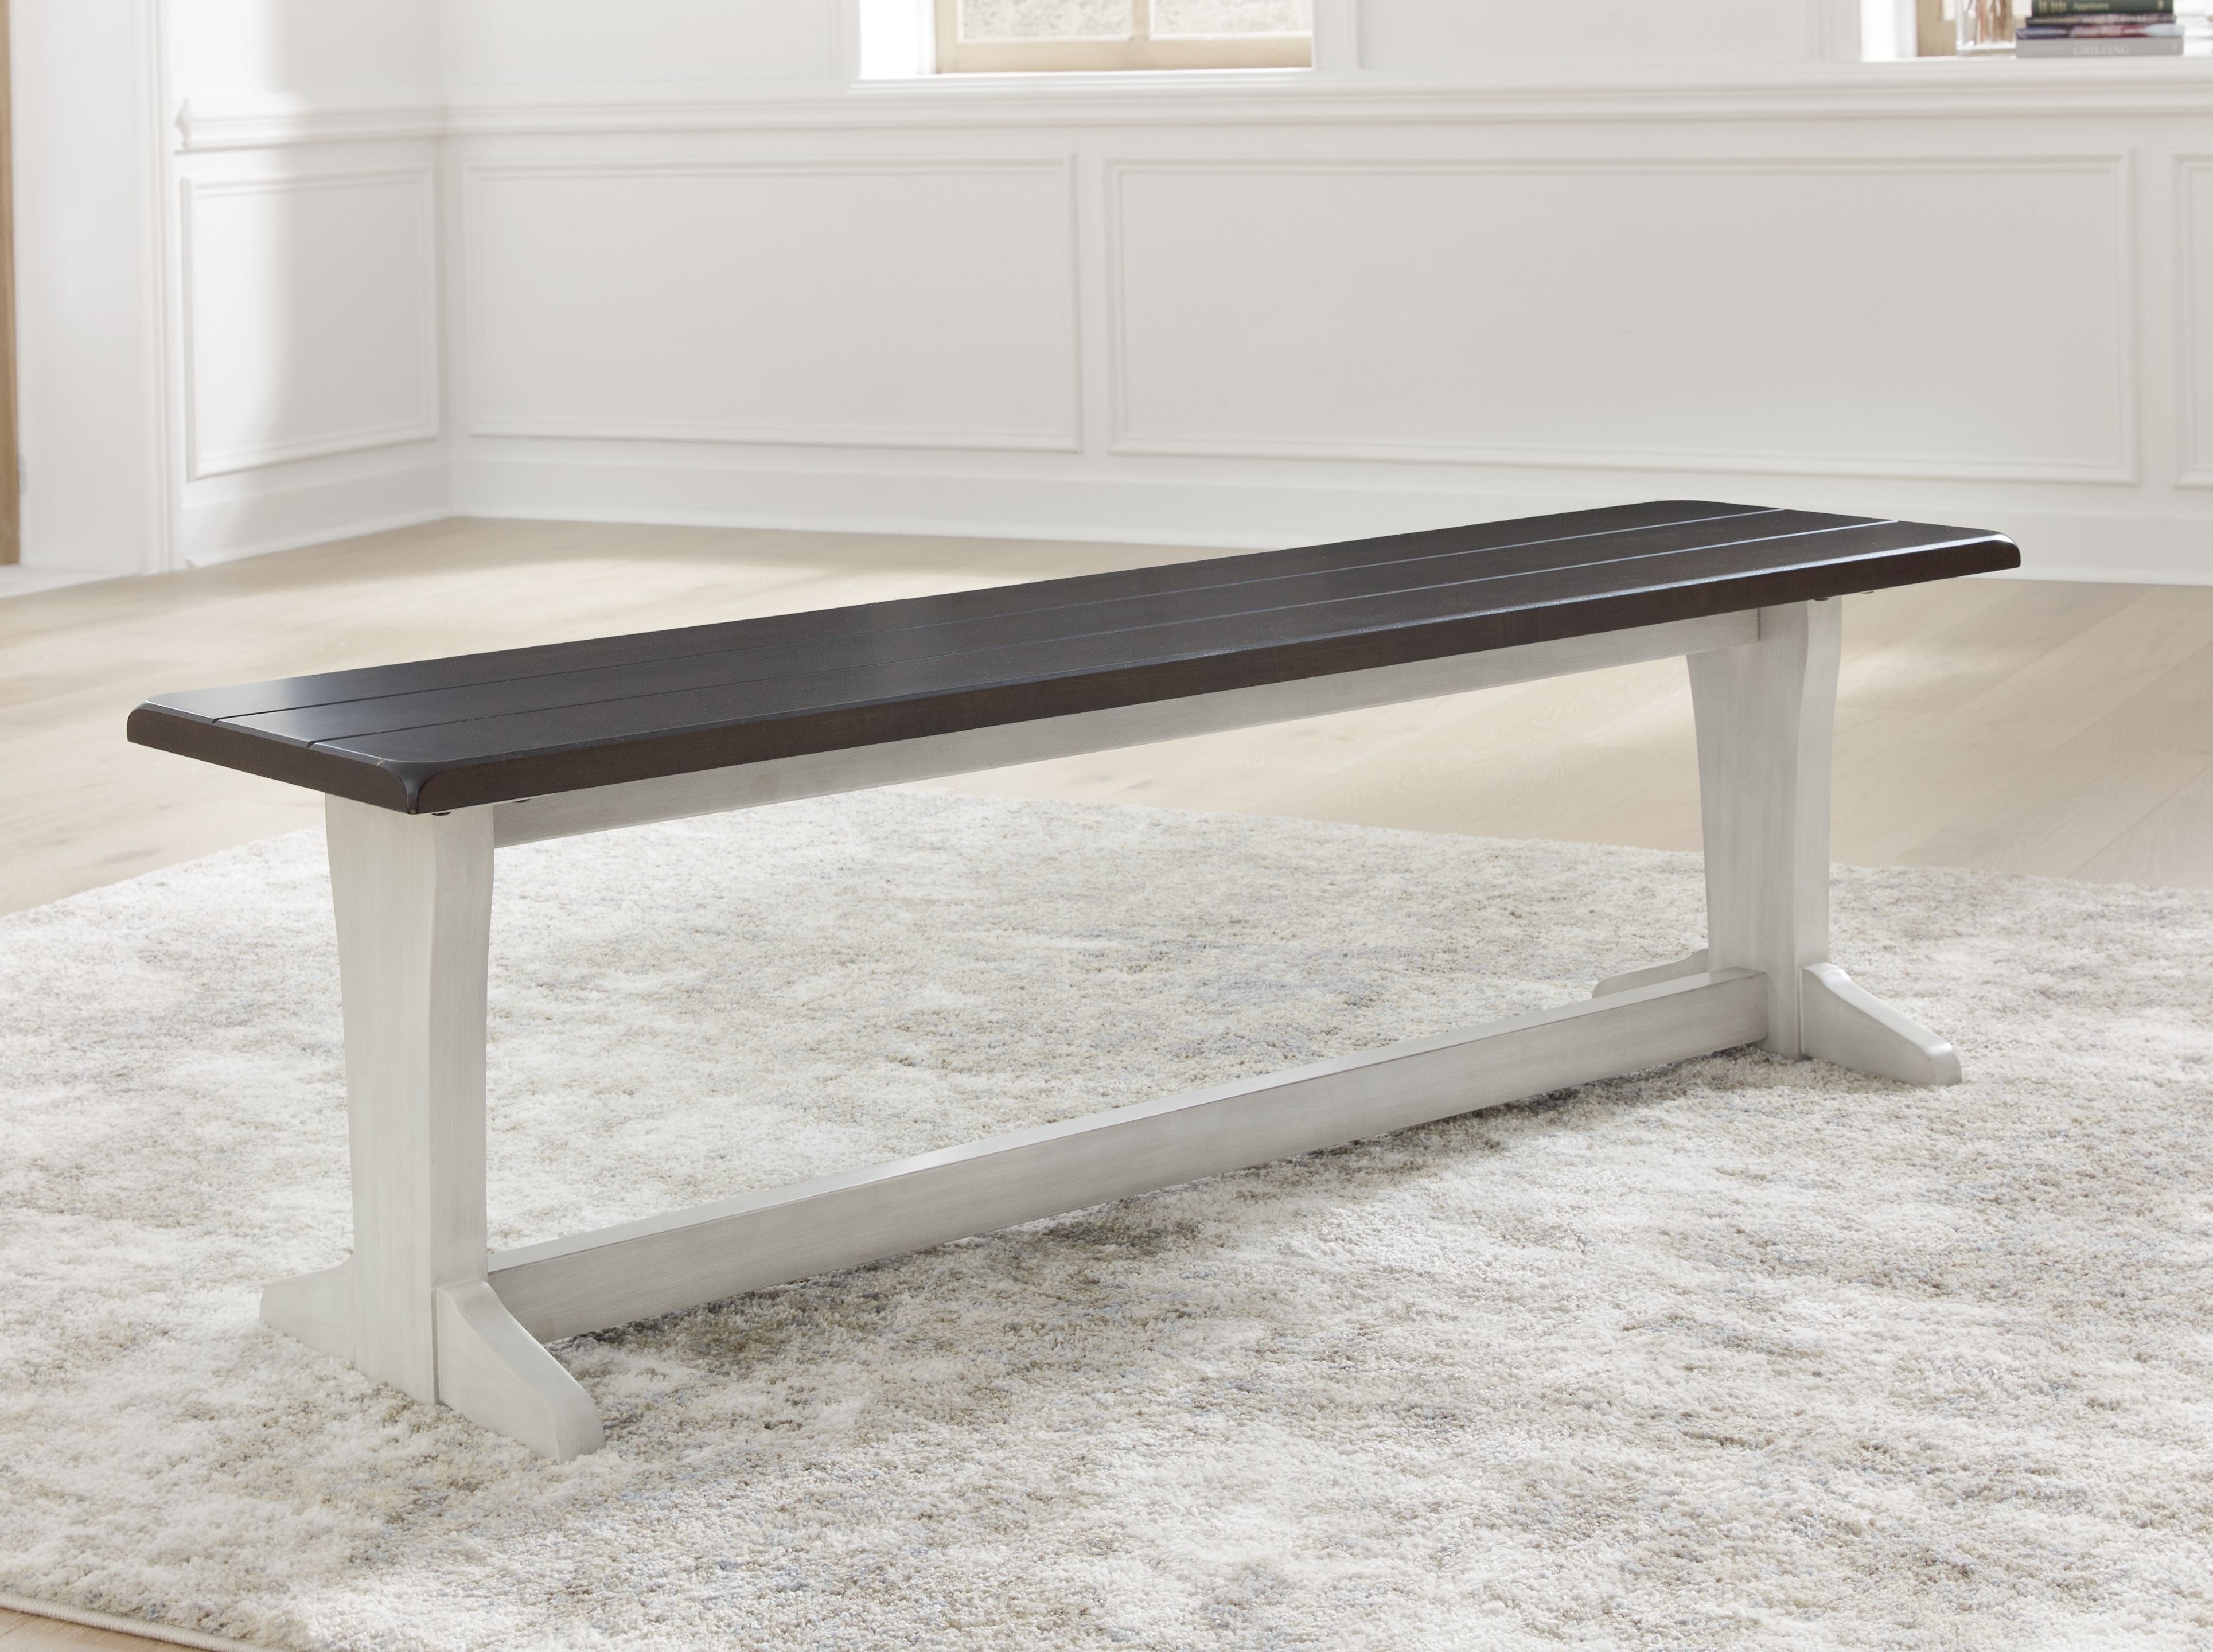 Darborn - Gray / Brown - Large Dining Room Bench